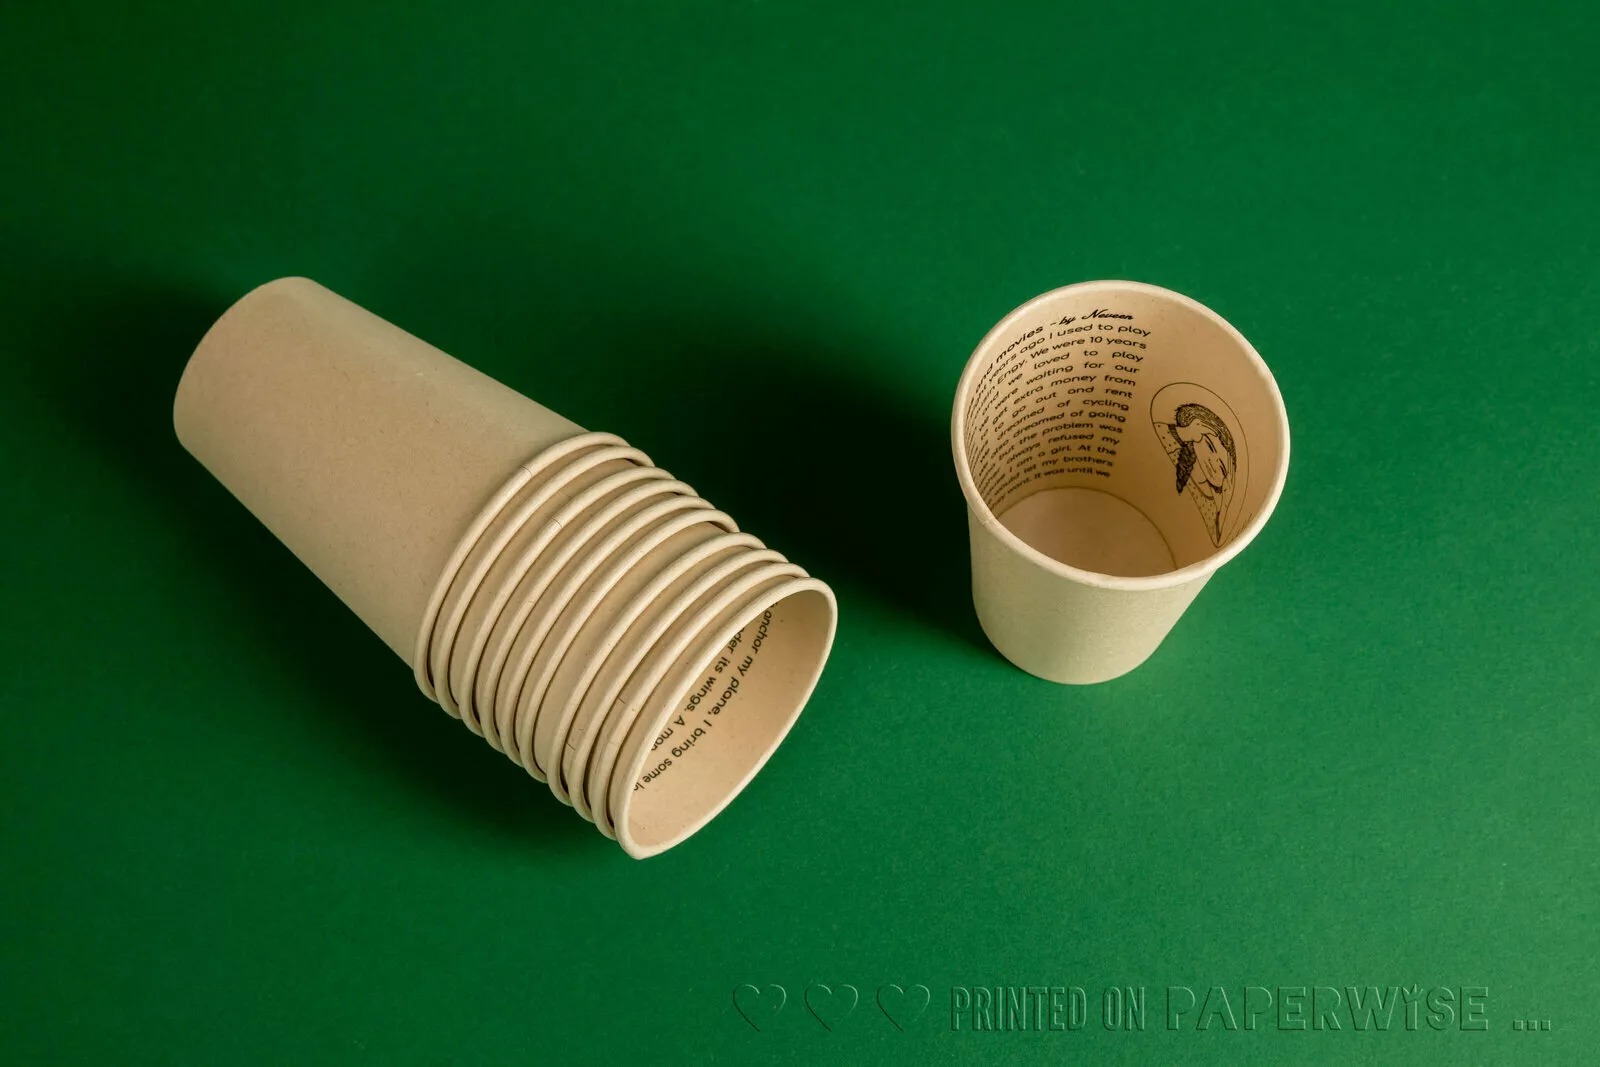 PaperWise eco bio cups drinks coffee tea water disposable compostable paper board insideprinting packaging office promo